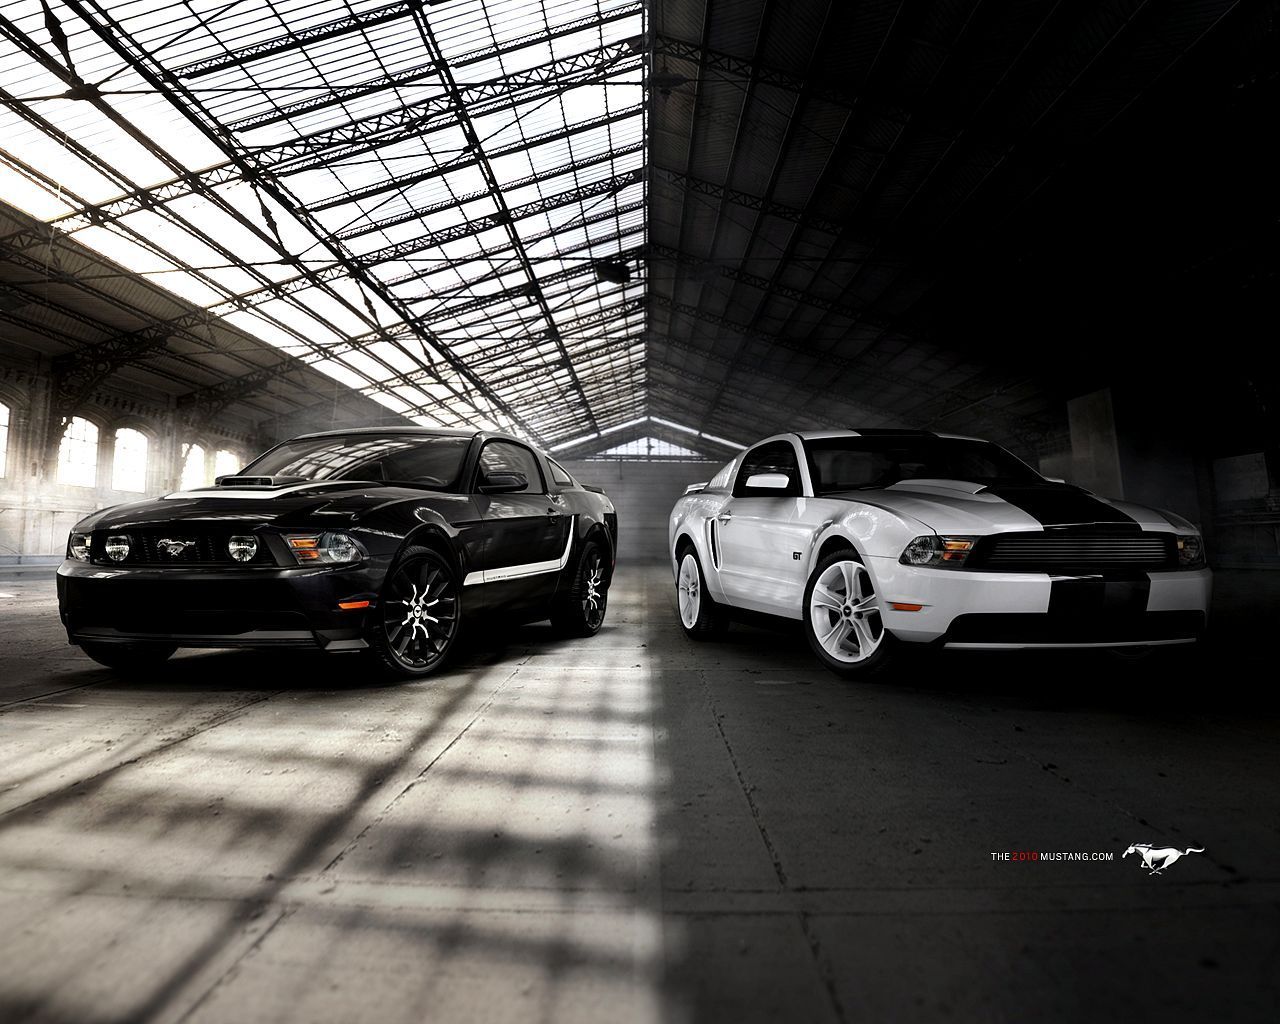 Ford Mustang Shelby Gt500 Wallpaper 1280x800 ID28554